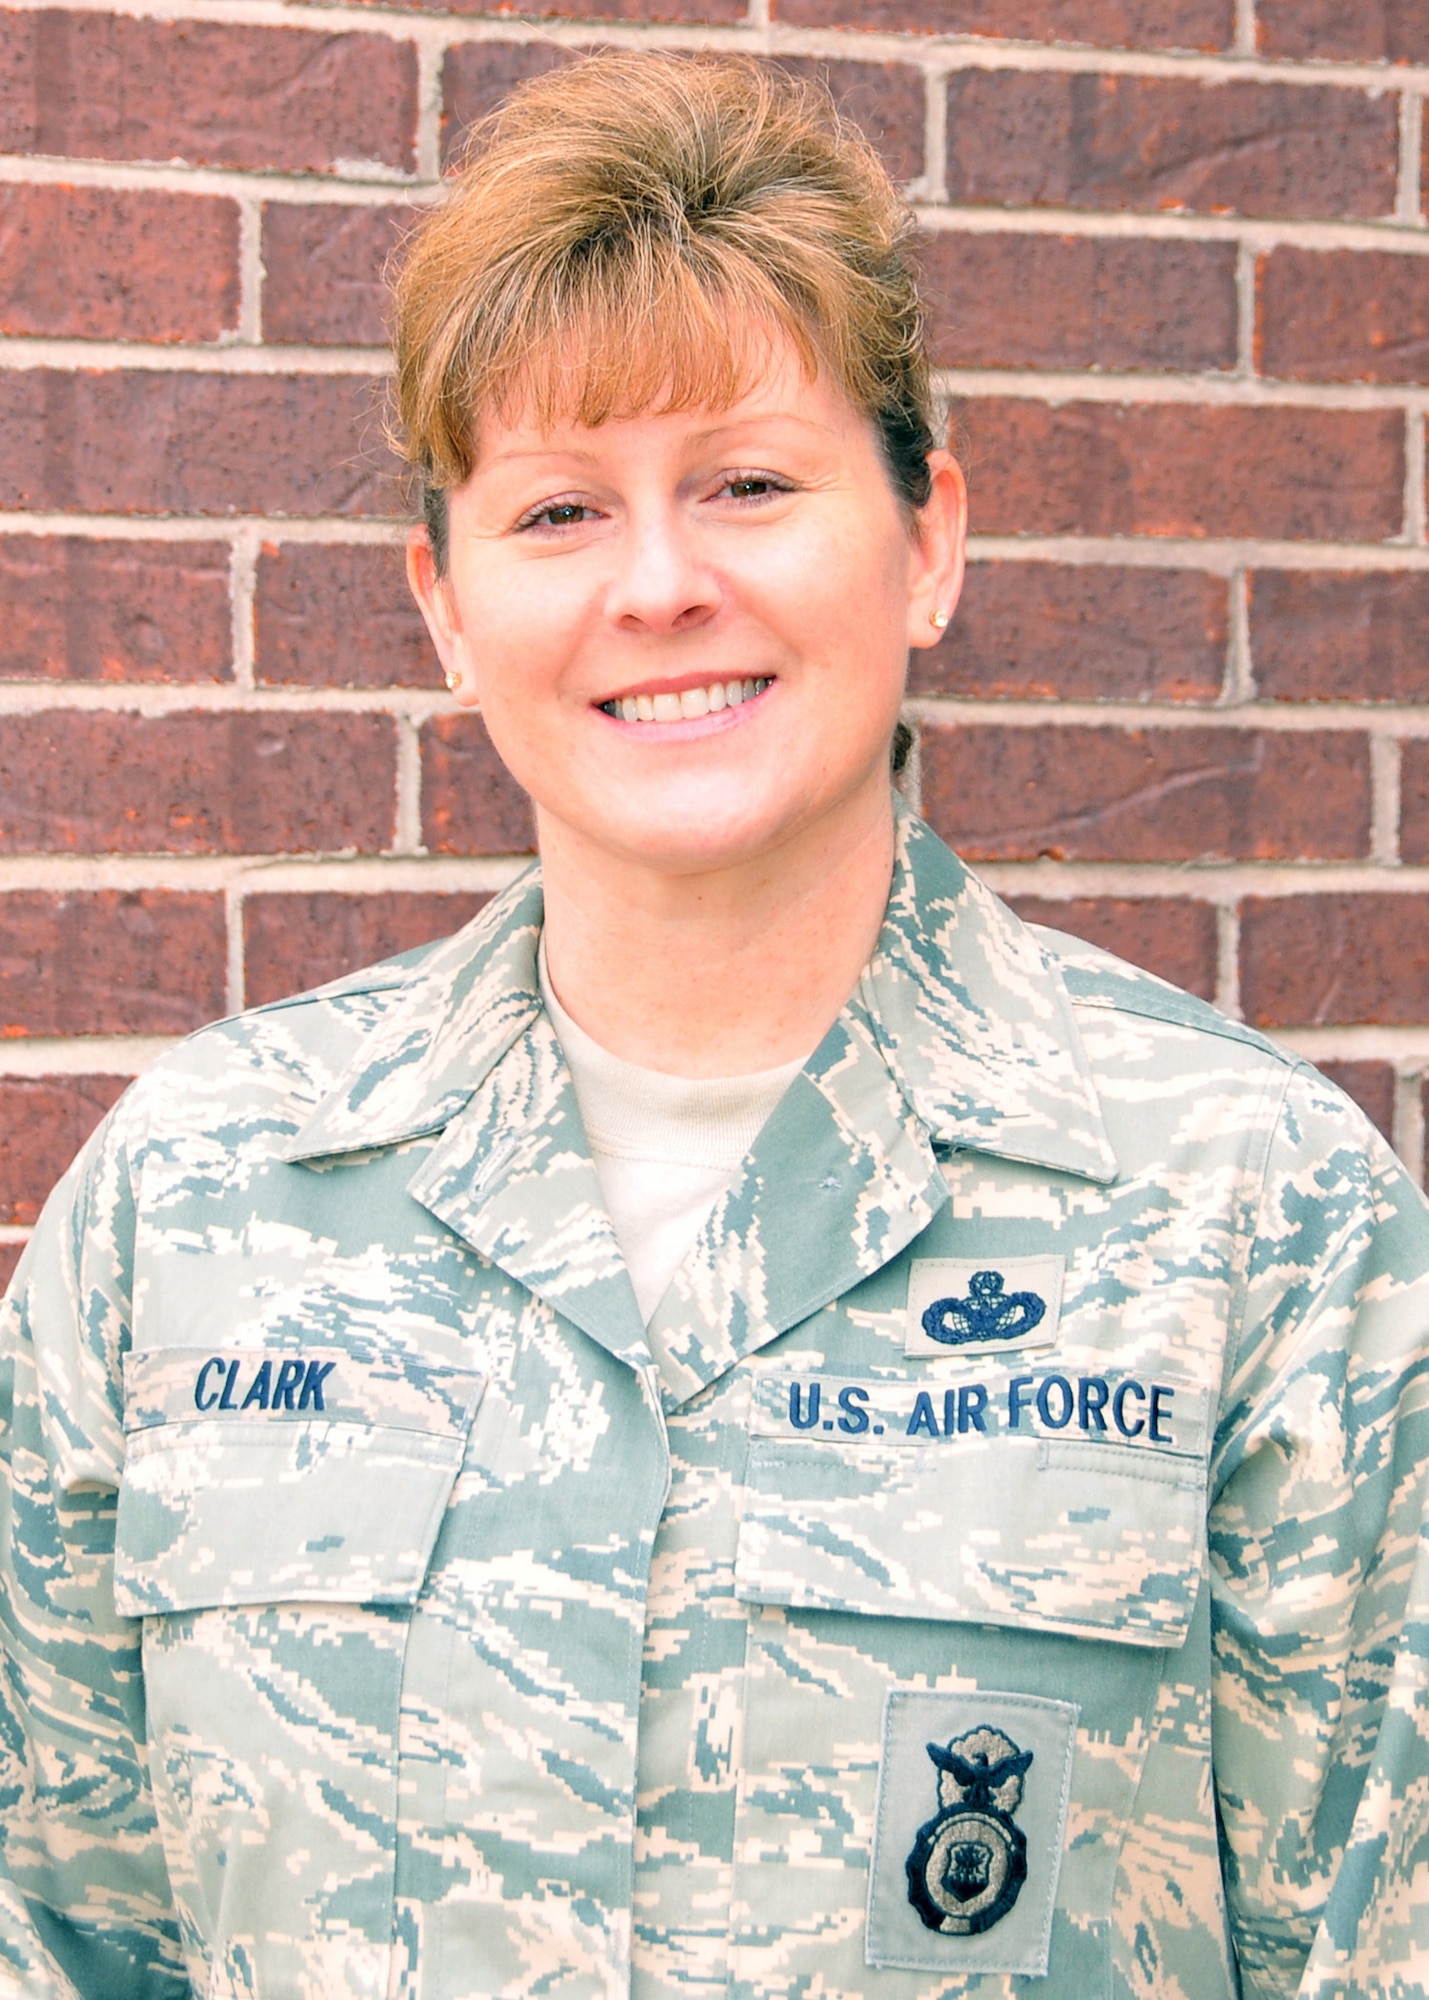 Chief Master Sgt. Laura Clark of the 131st Bomb Wing, Missouri Air National Guard, at Lambert Field and Whiteman AFB, assumes the role of state command chief master sergeant for the Missouri National Guard.  Clark, the Missouri National Guard's first female state command chief, resides in O'Fallon, MO
(Photo by Senior Master Sgt, Mary-Dale Amison)